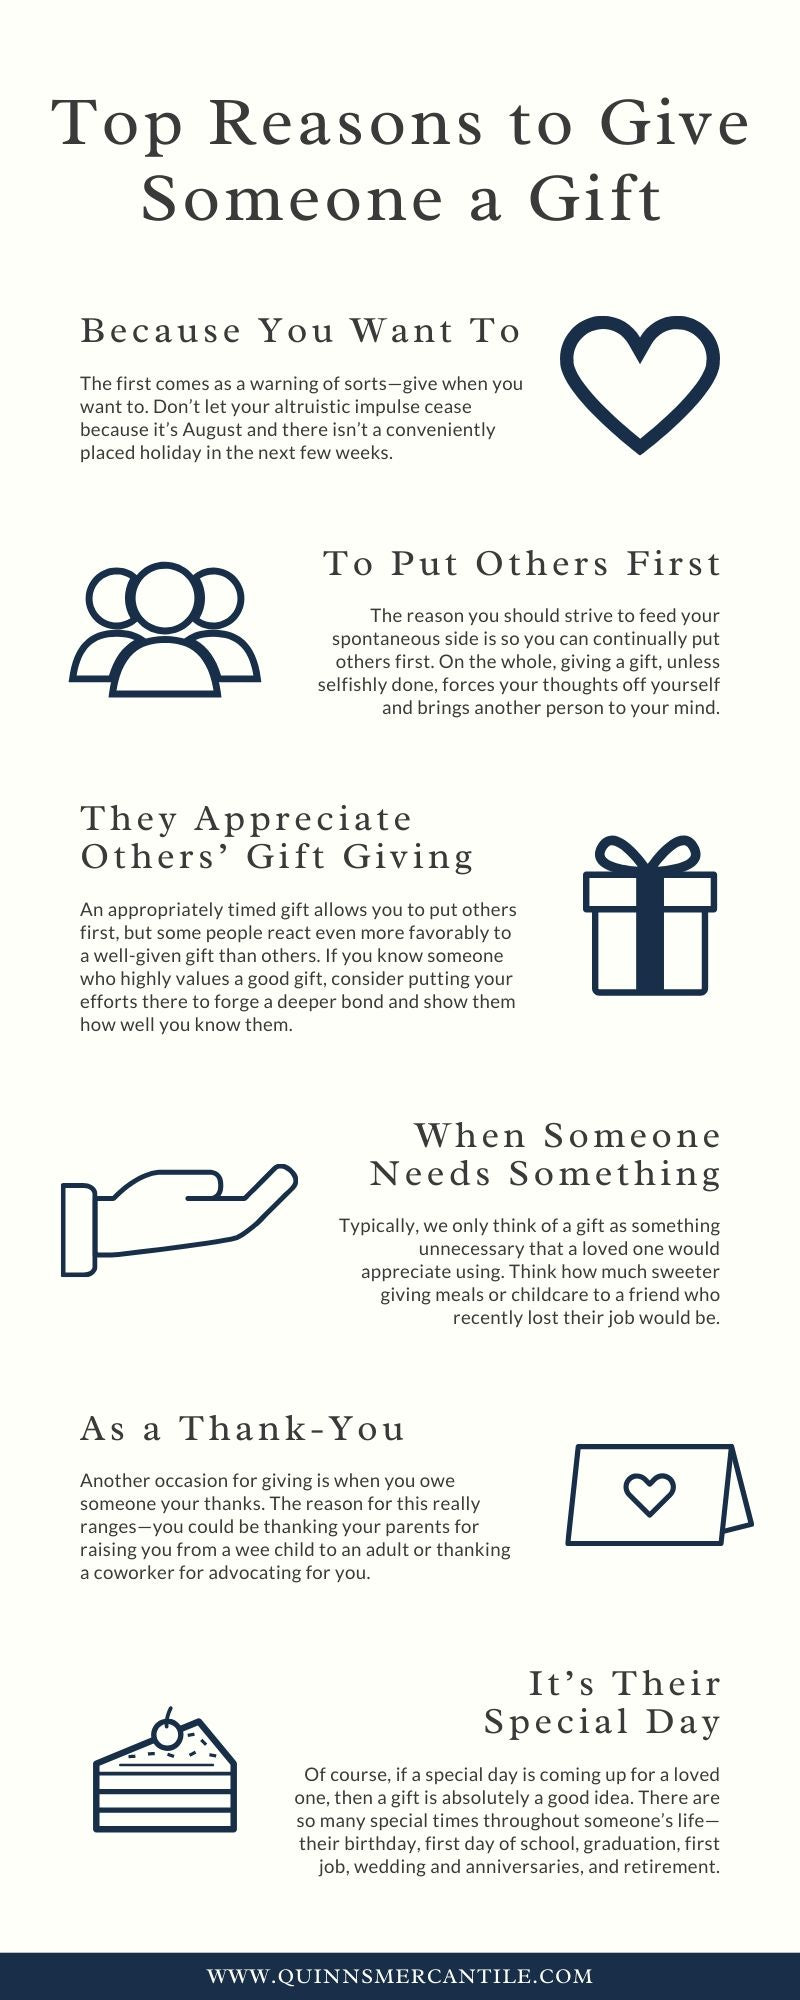 Reasons to Give Someone a Gift